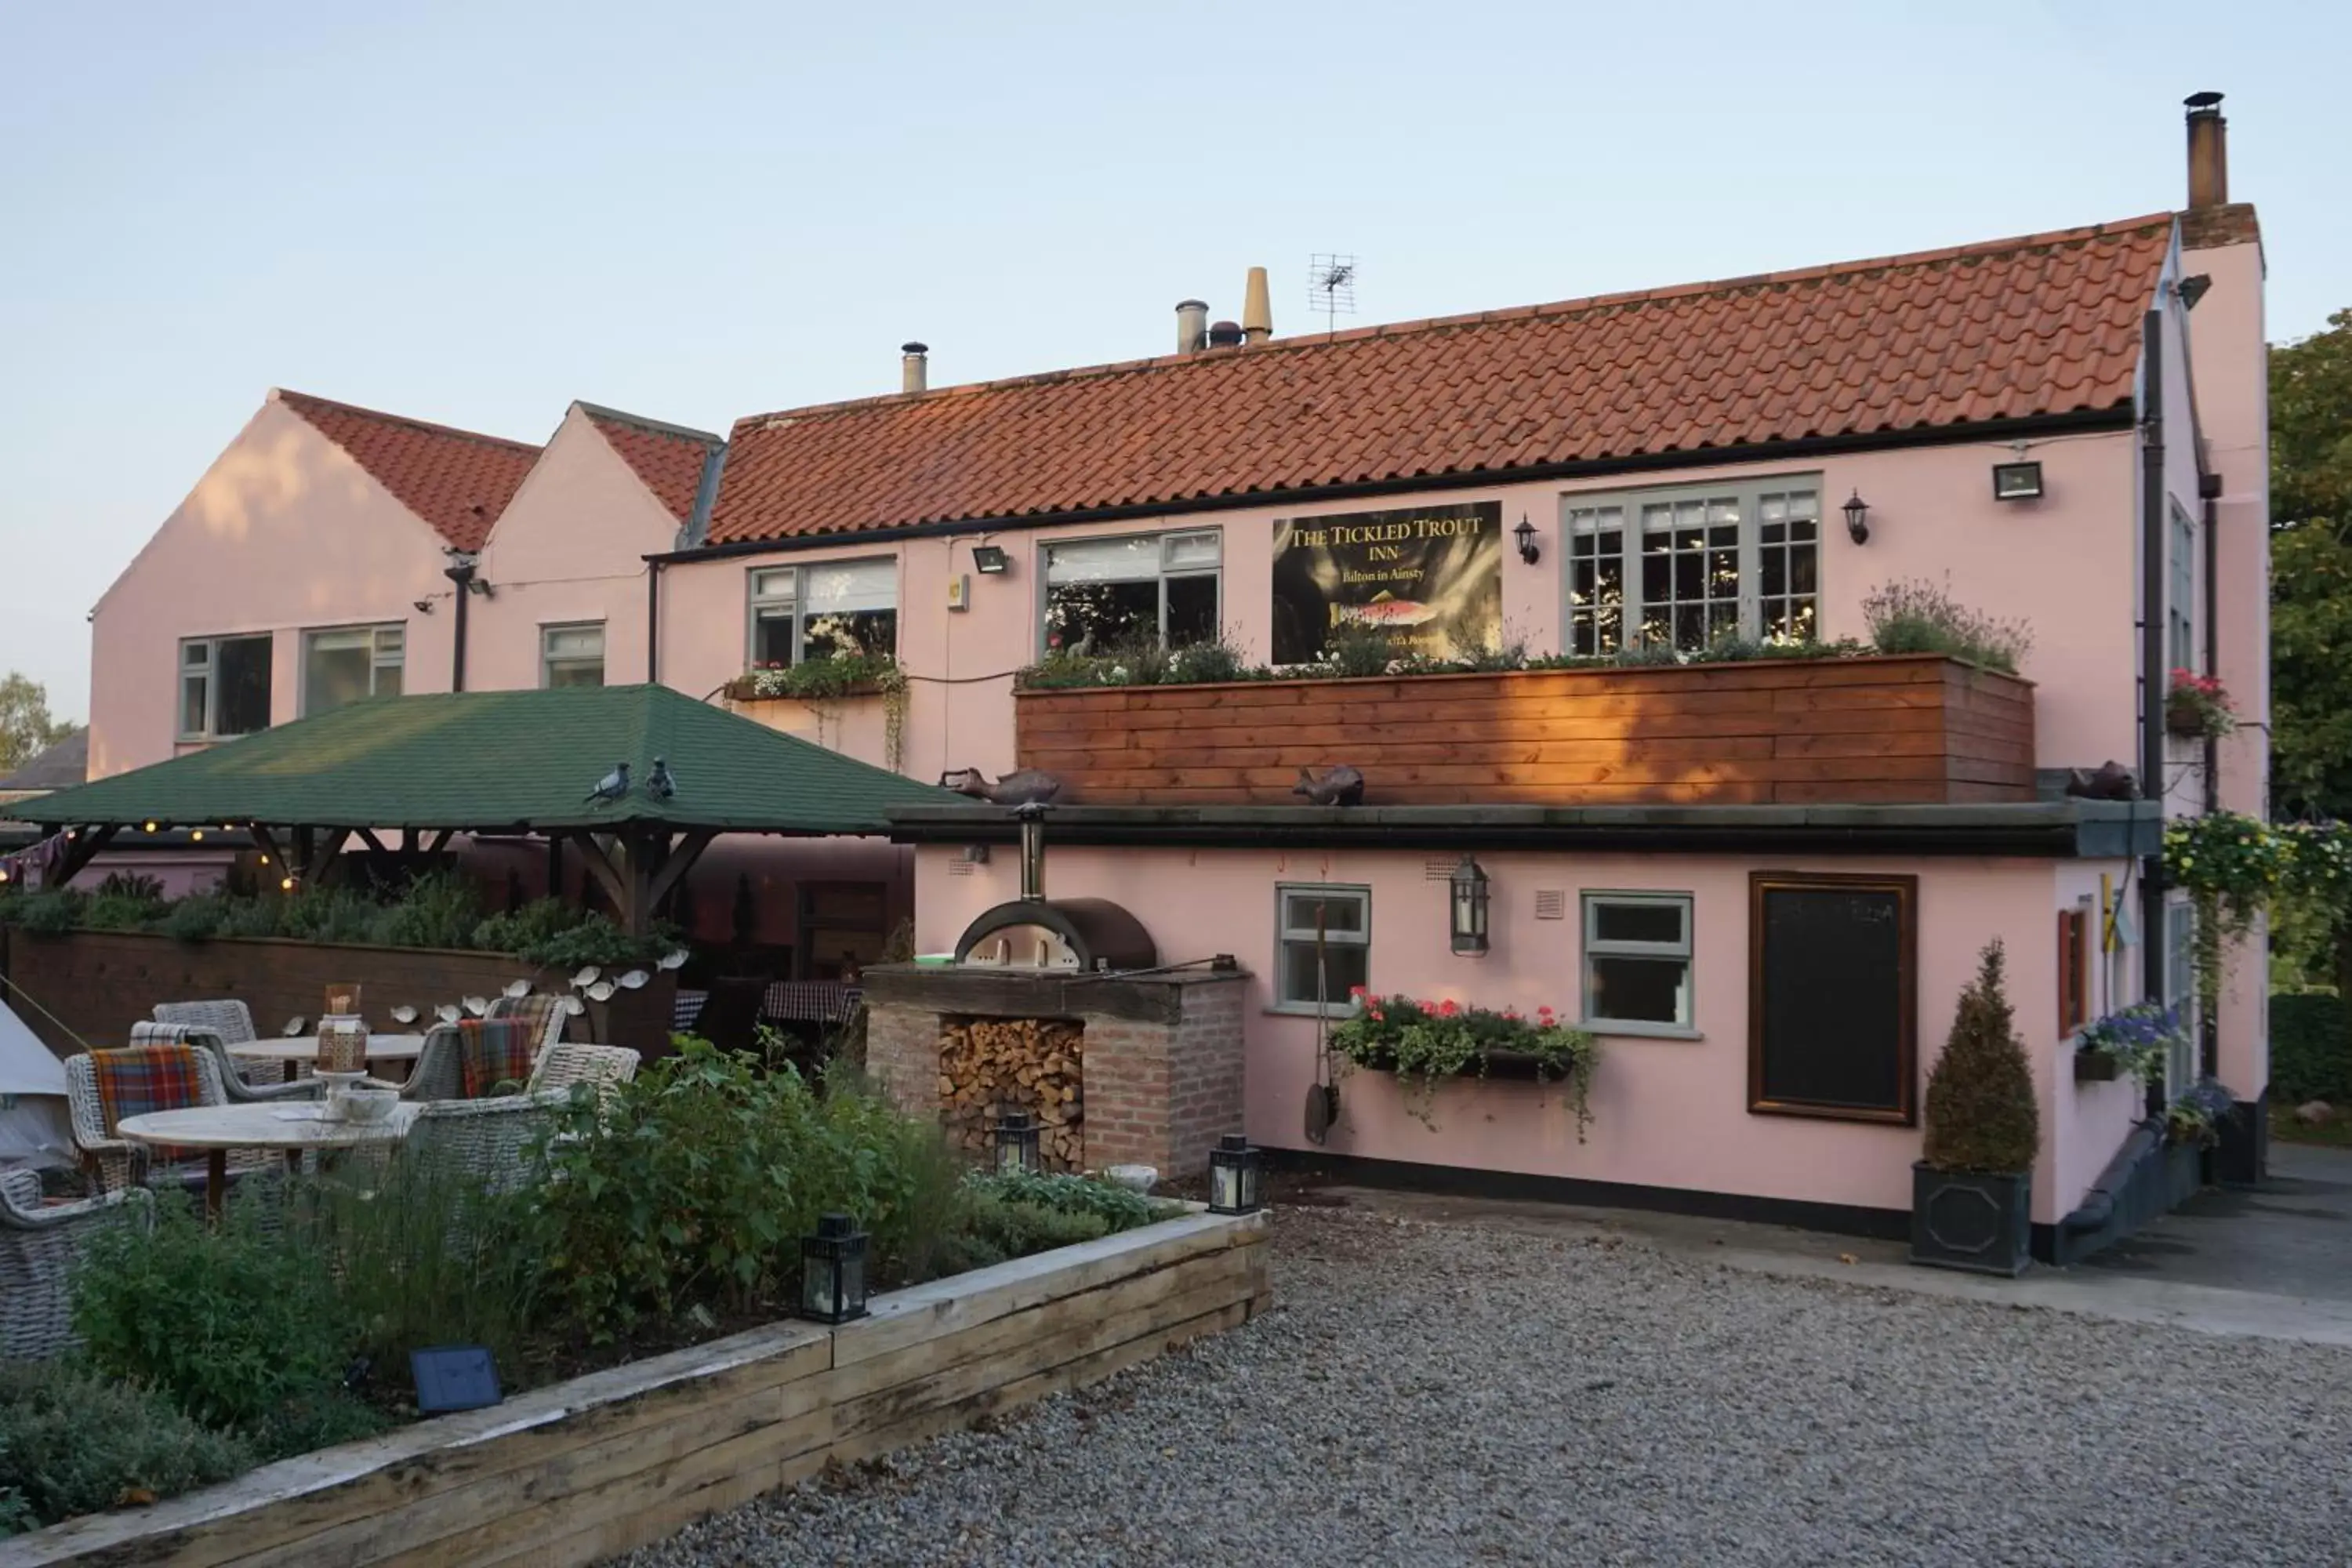 Property Building in The Tickled Trout Inn Bilton-in-Ainsty